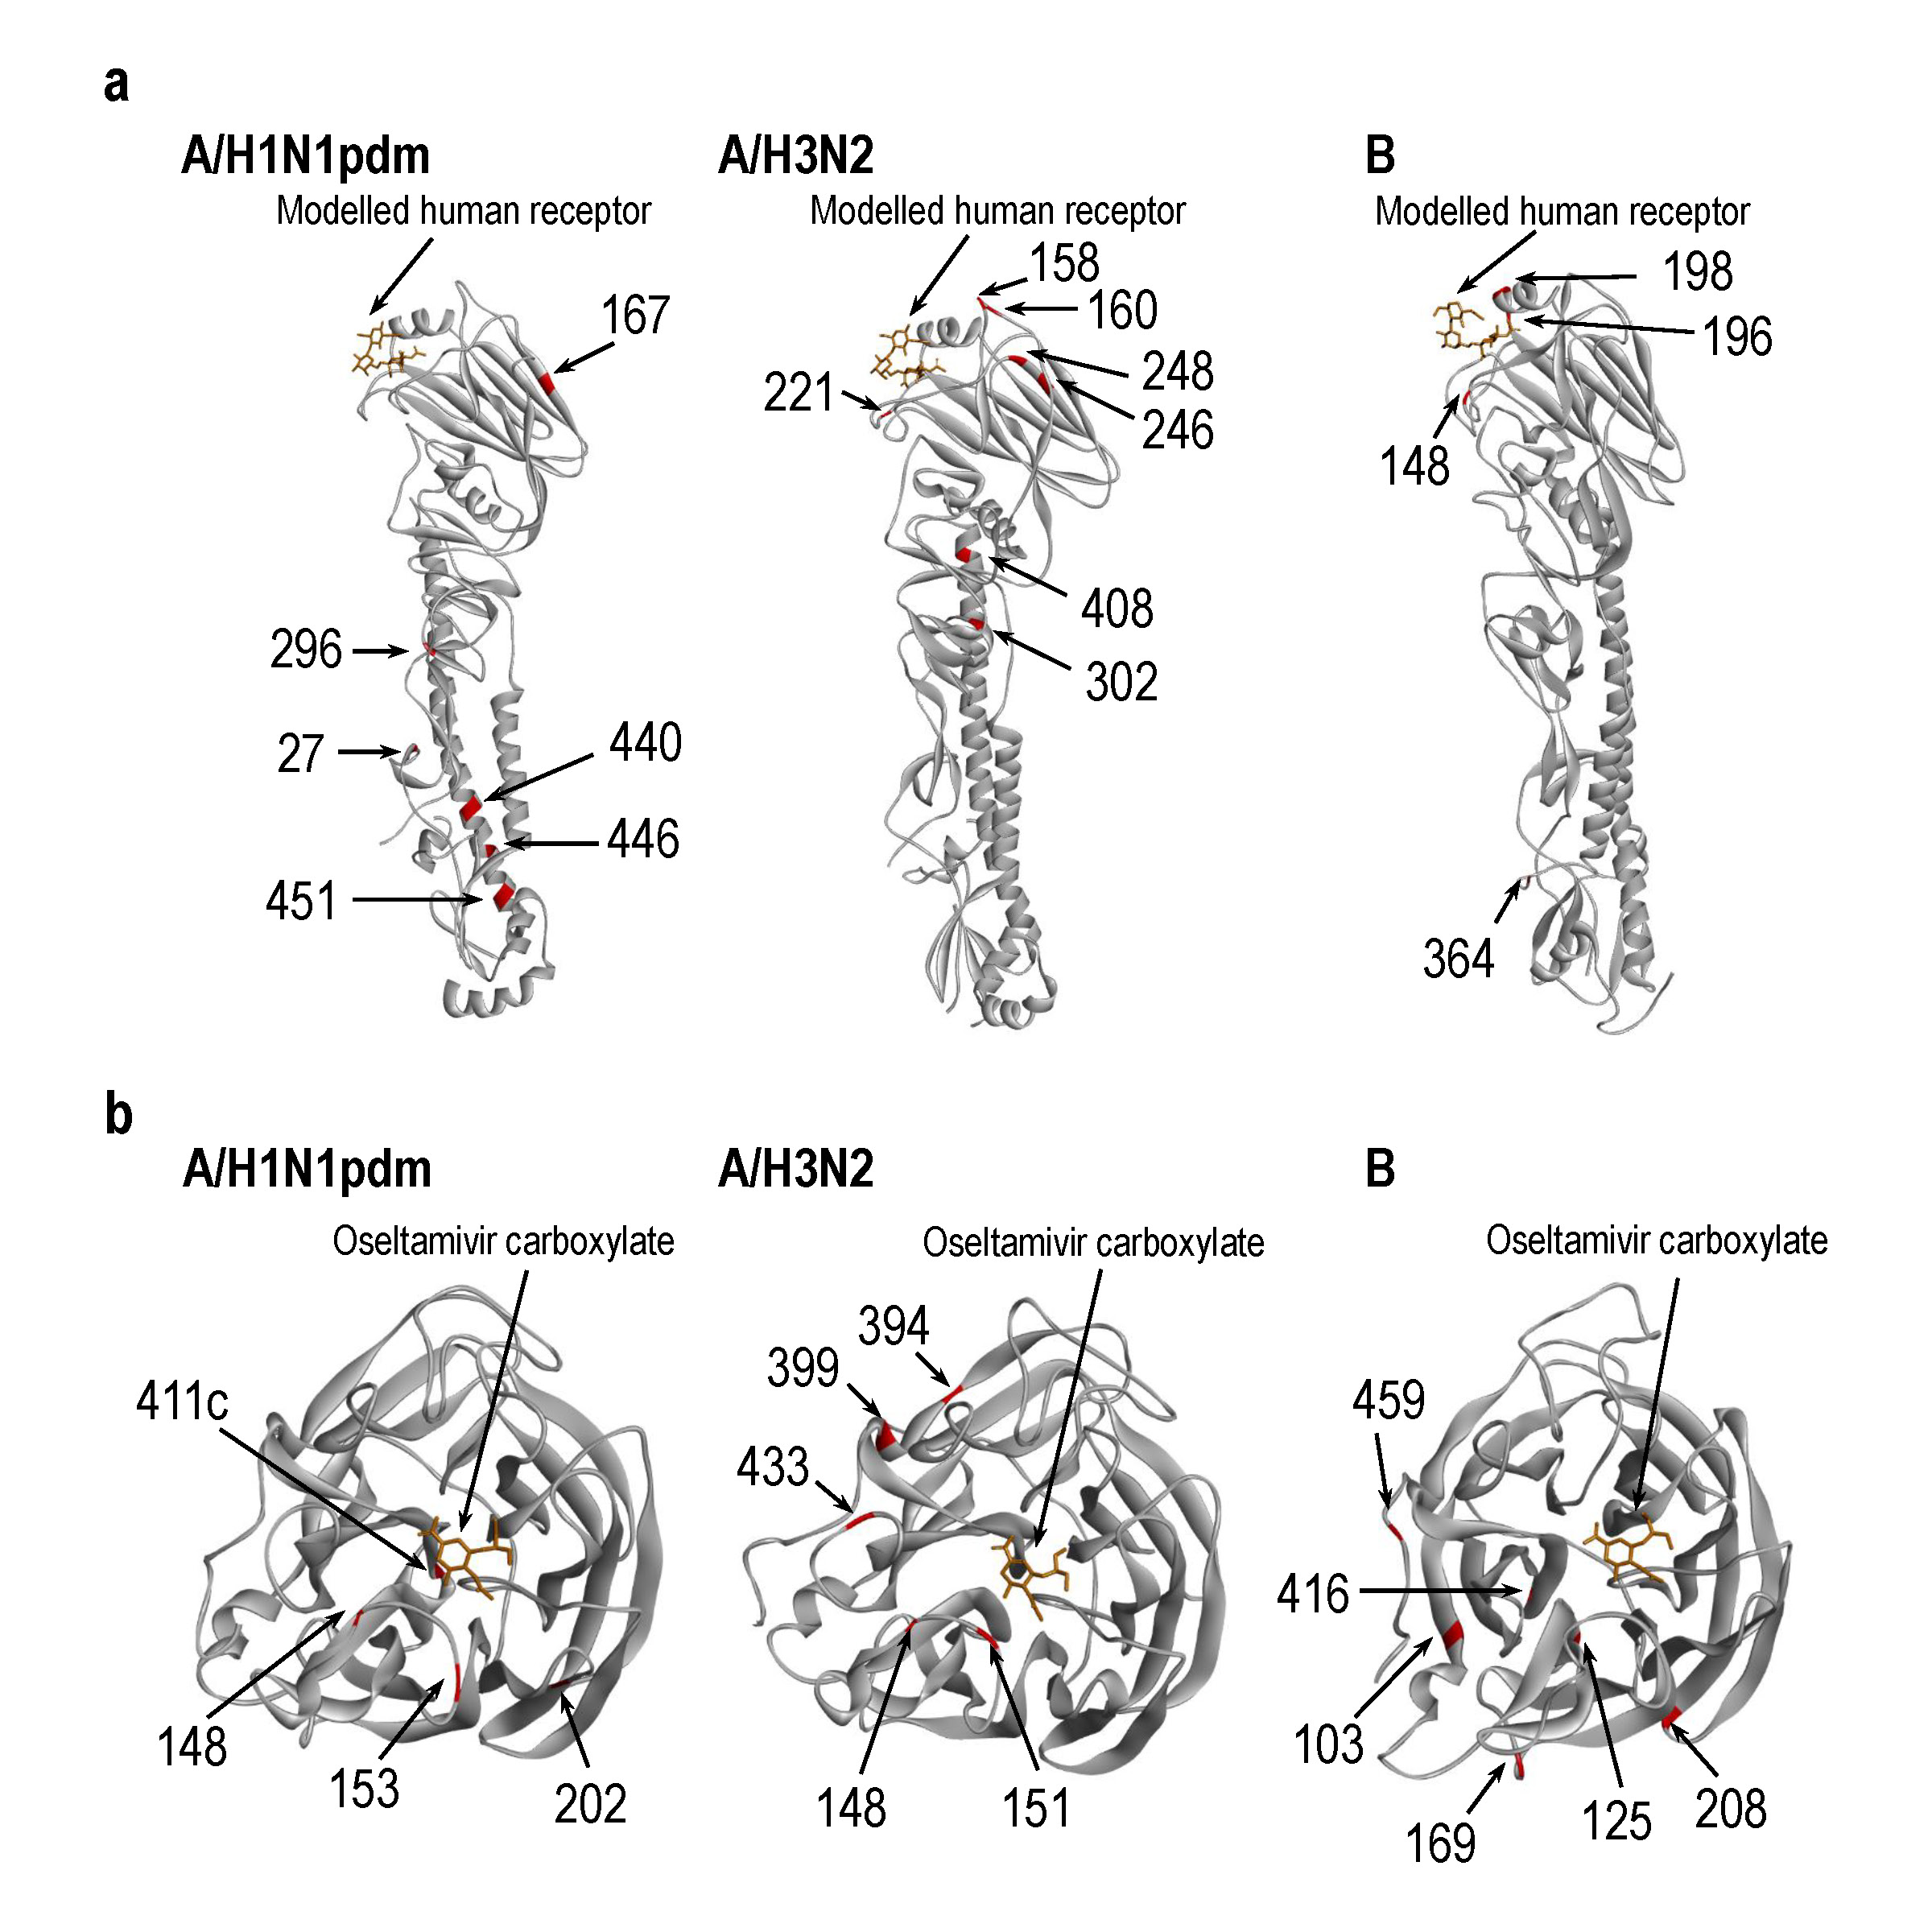 Localization of amino acid changes in HA and NA proteins